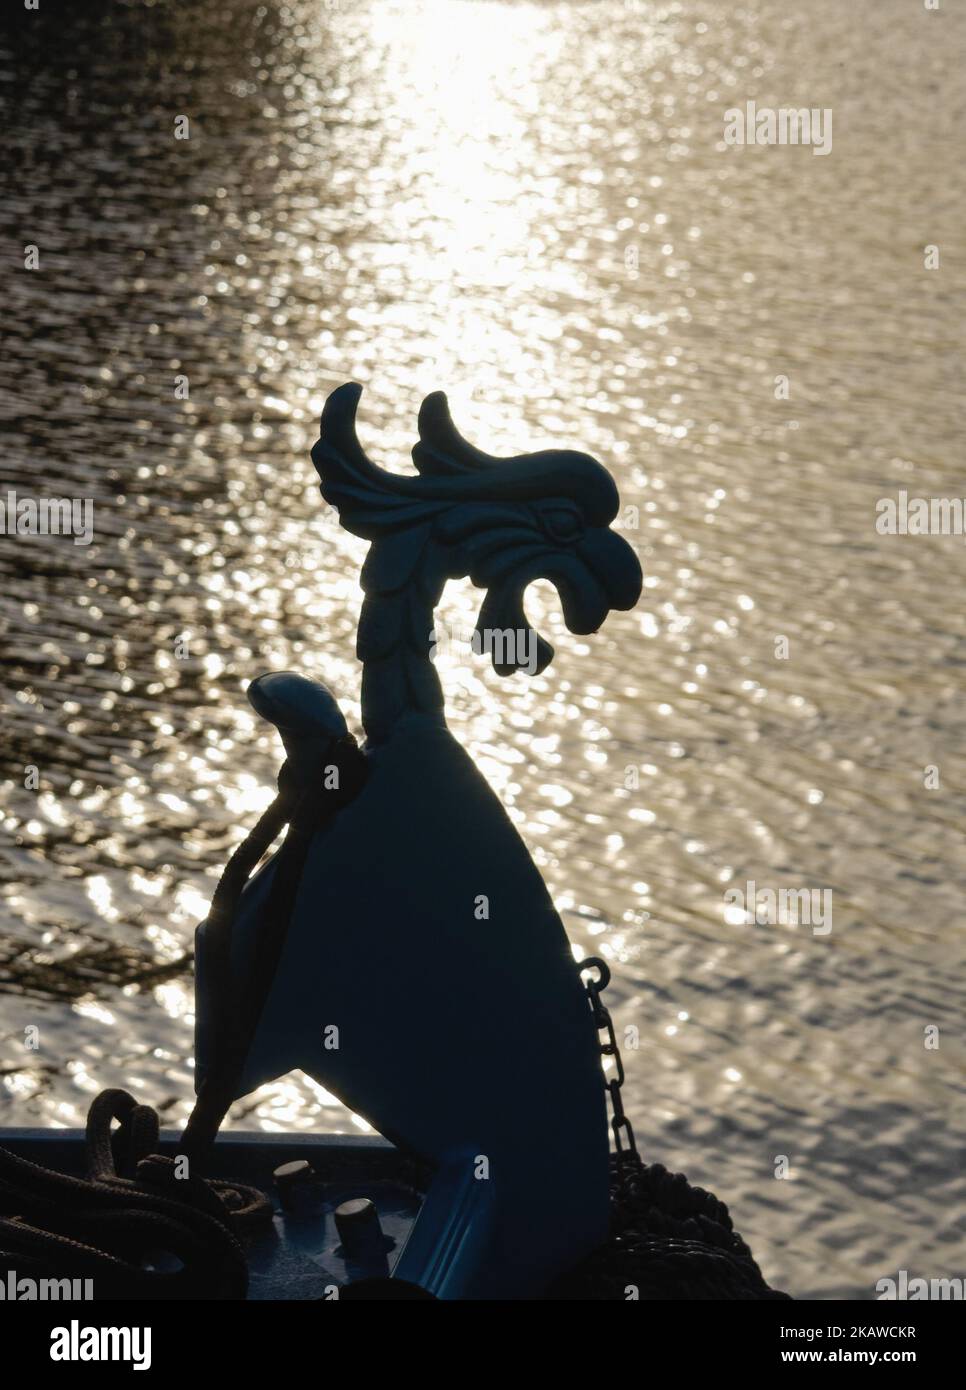 Silhouette of a dragon figurehead on a boat against a background of strong sunlight reflecting on a river surface, Shepperton UK Stock Photo